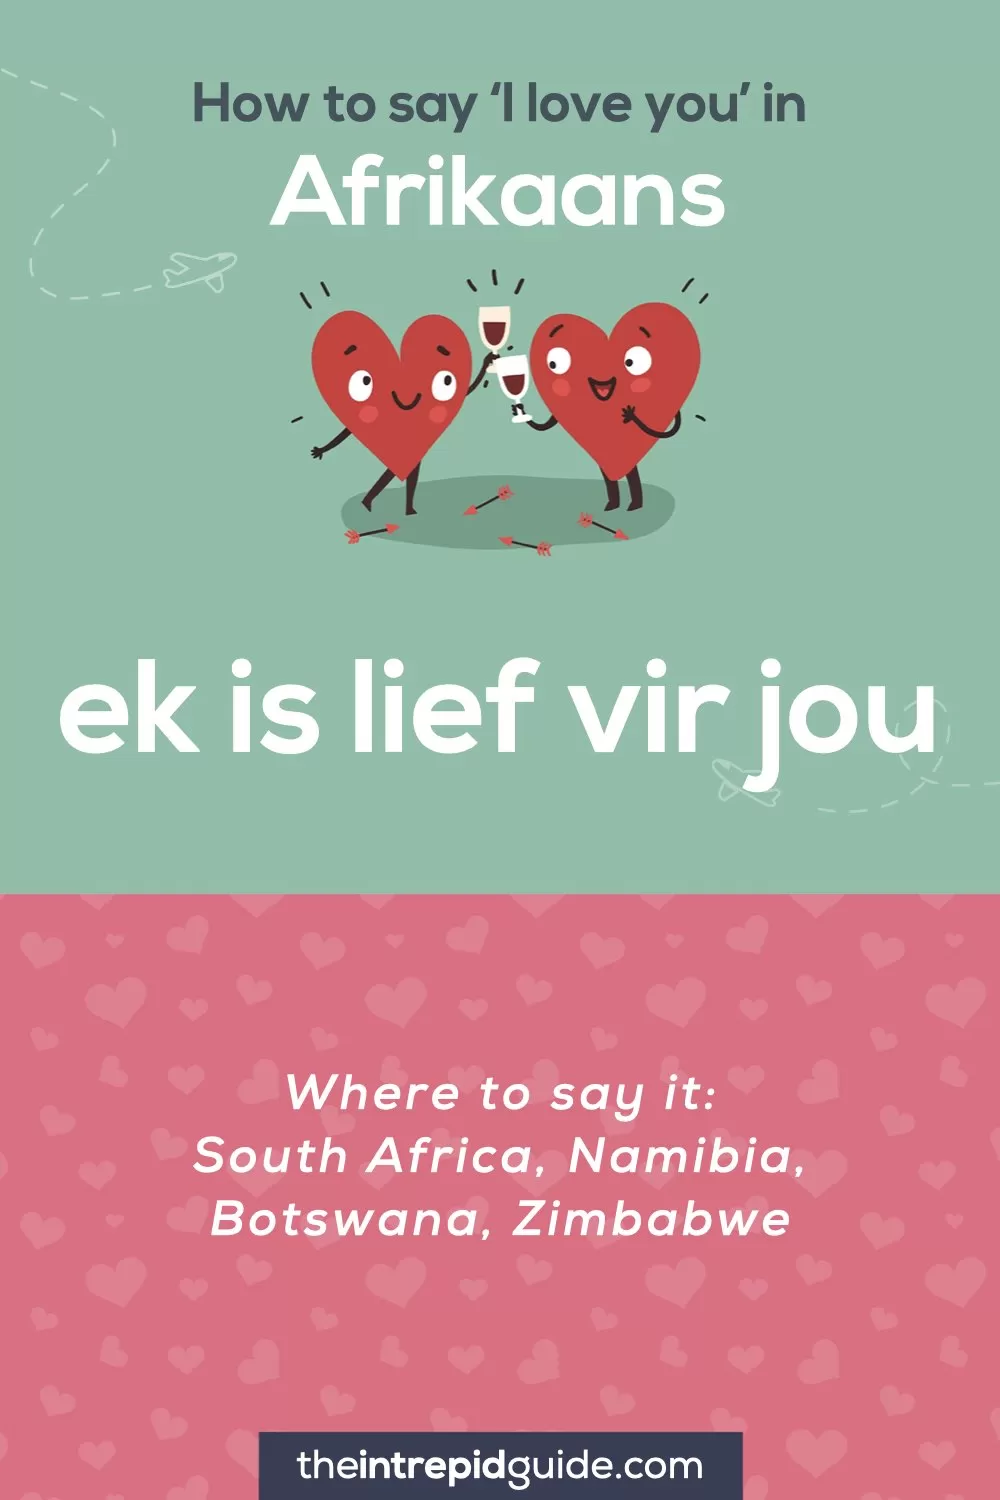 How to say I love you in different languages - Afrikaans - Ek is lief vir jou